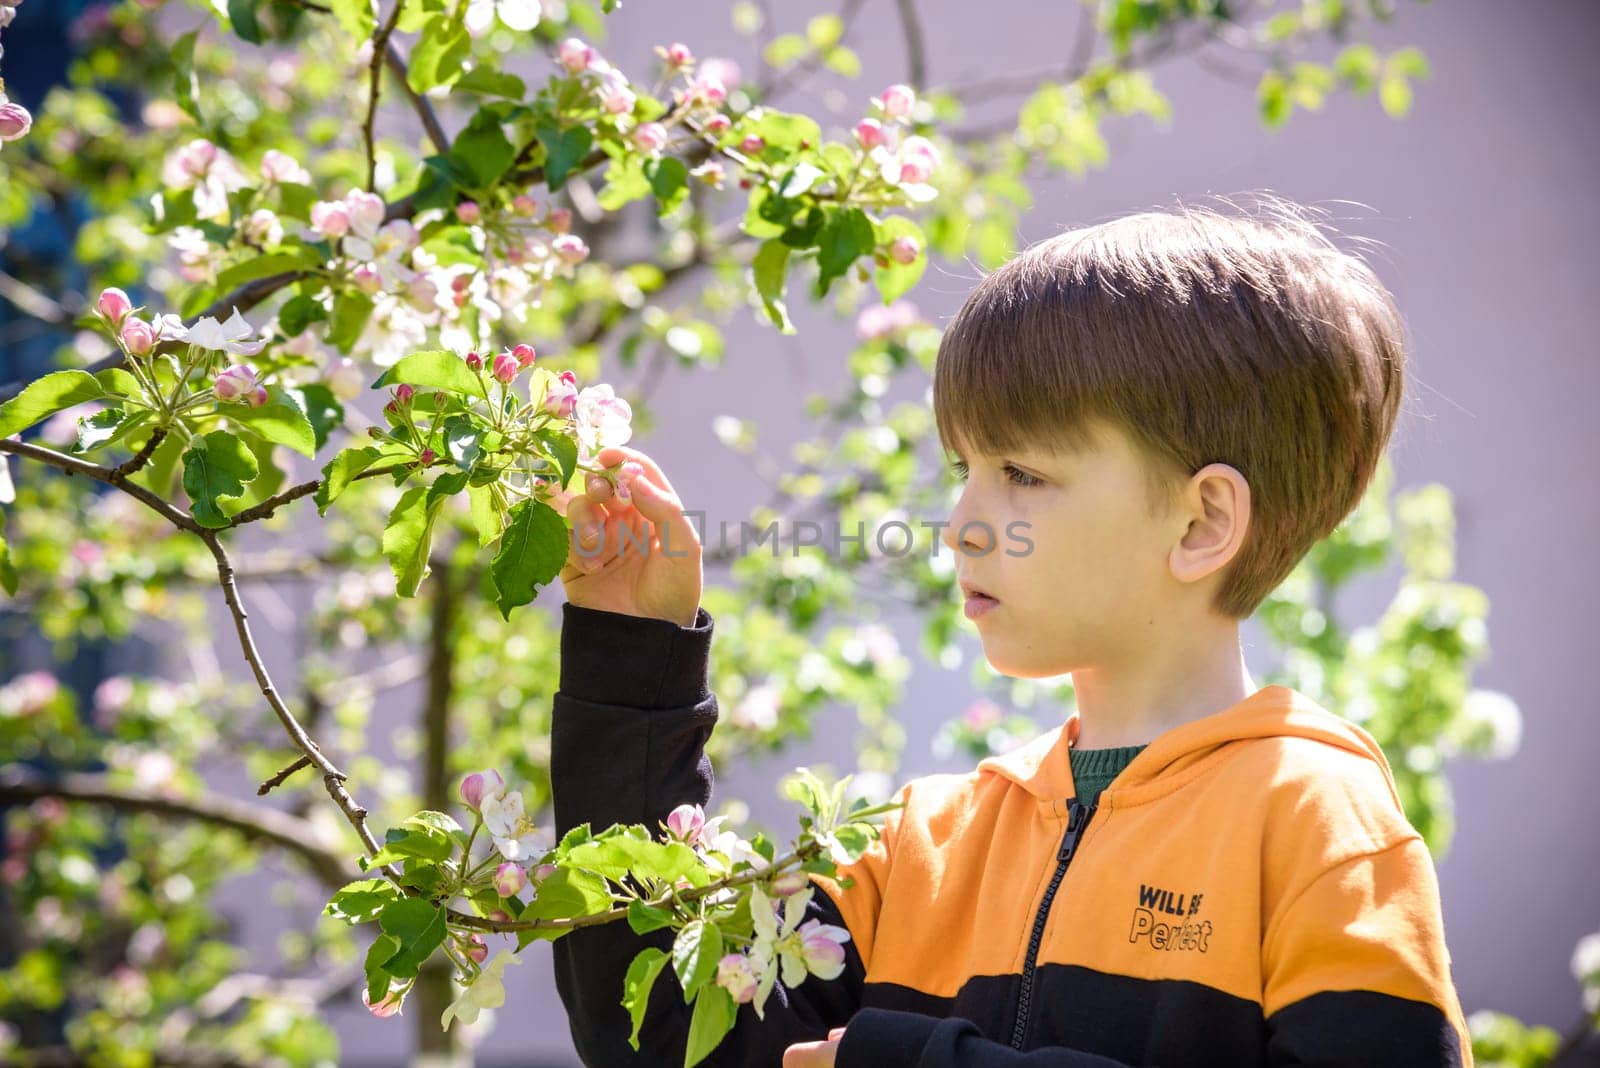 The boy at the apple blossom in the spring garden by Kobysh